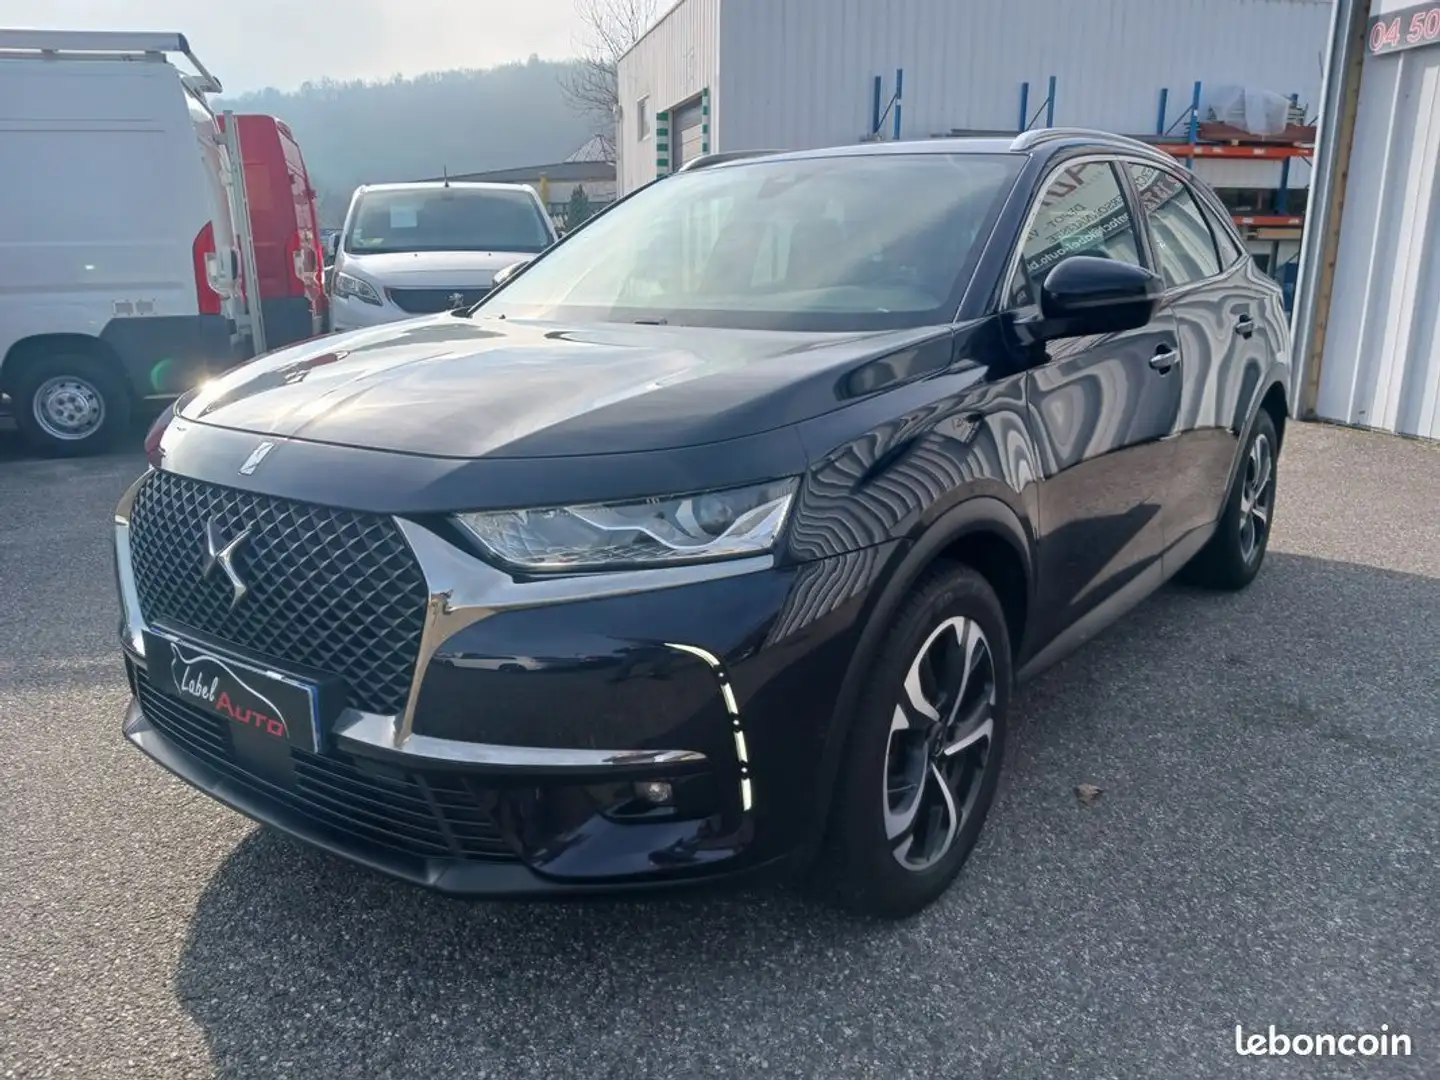 DS Automobiles DS 7 Crossback DS7 HDI 130 cv EAT8 So Chic 1ère Main 84800 km Cam Azul - 1